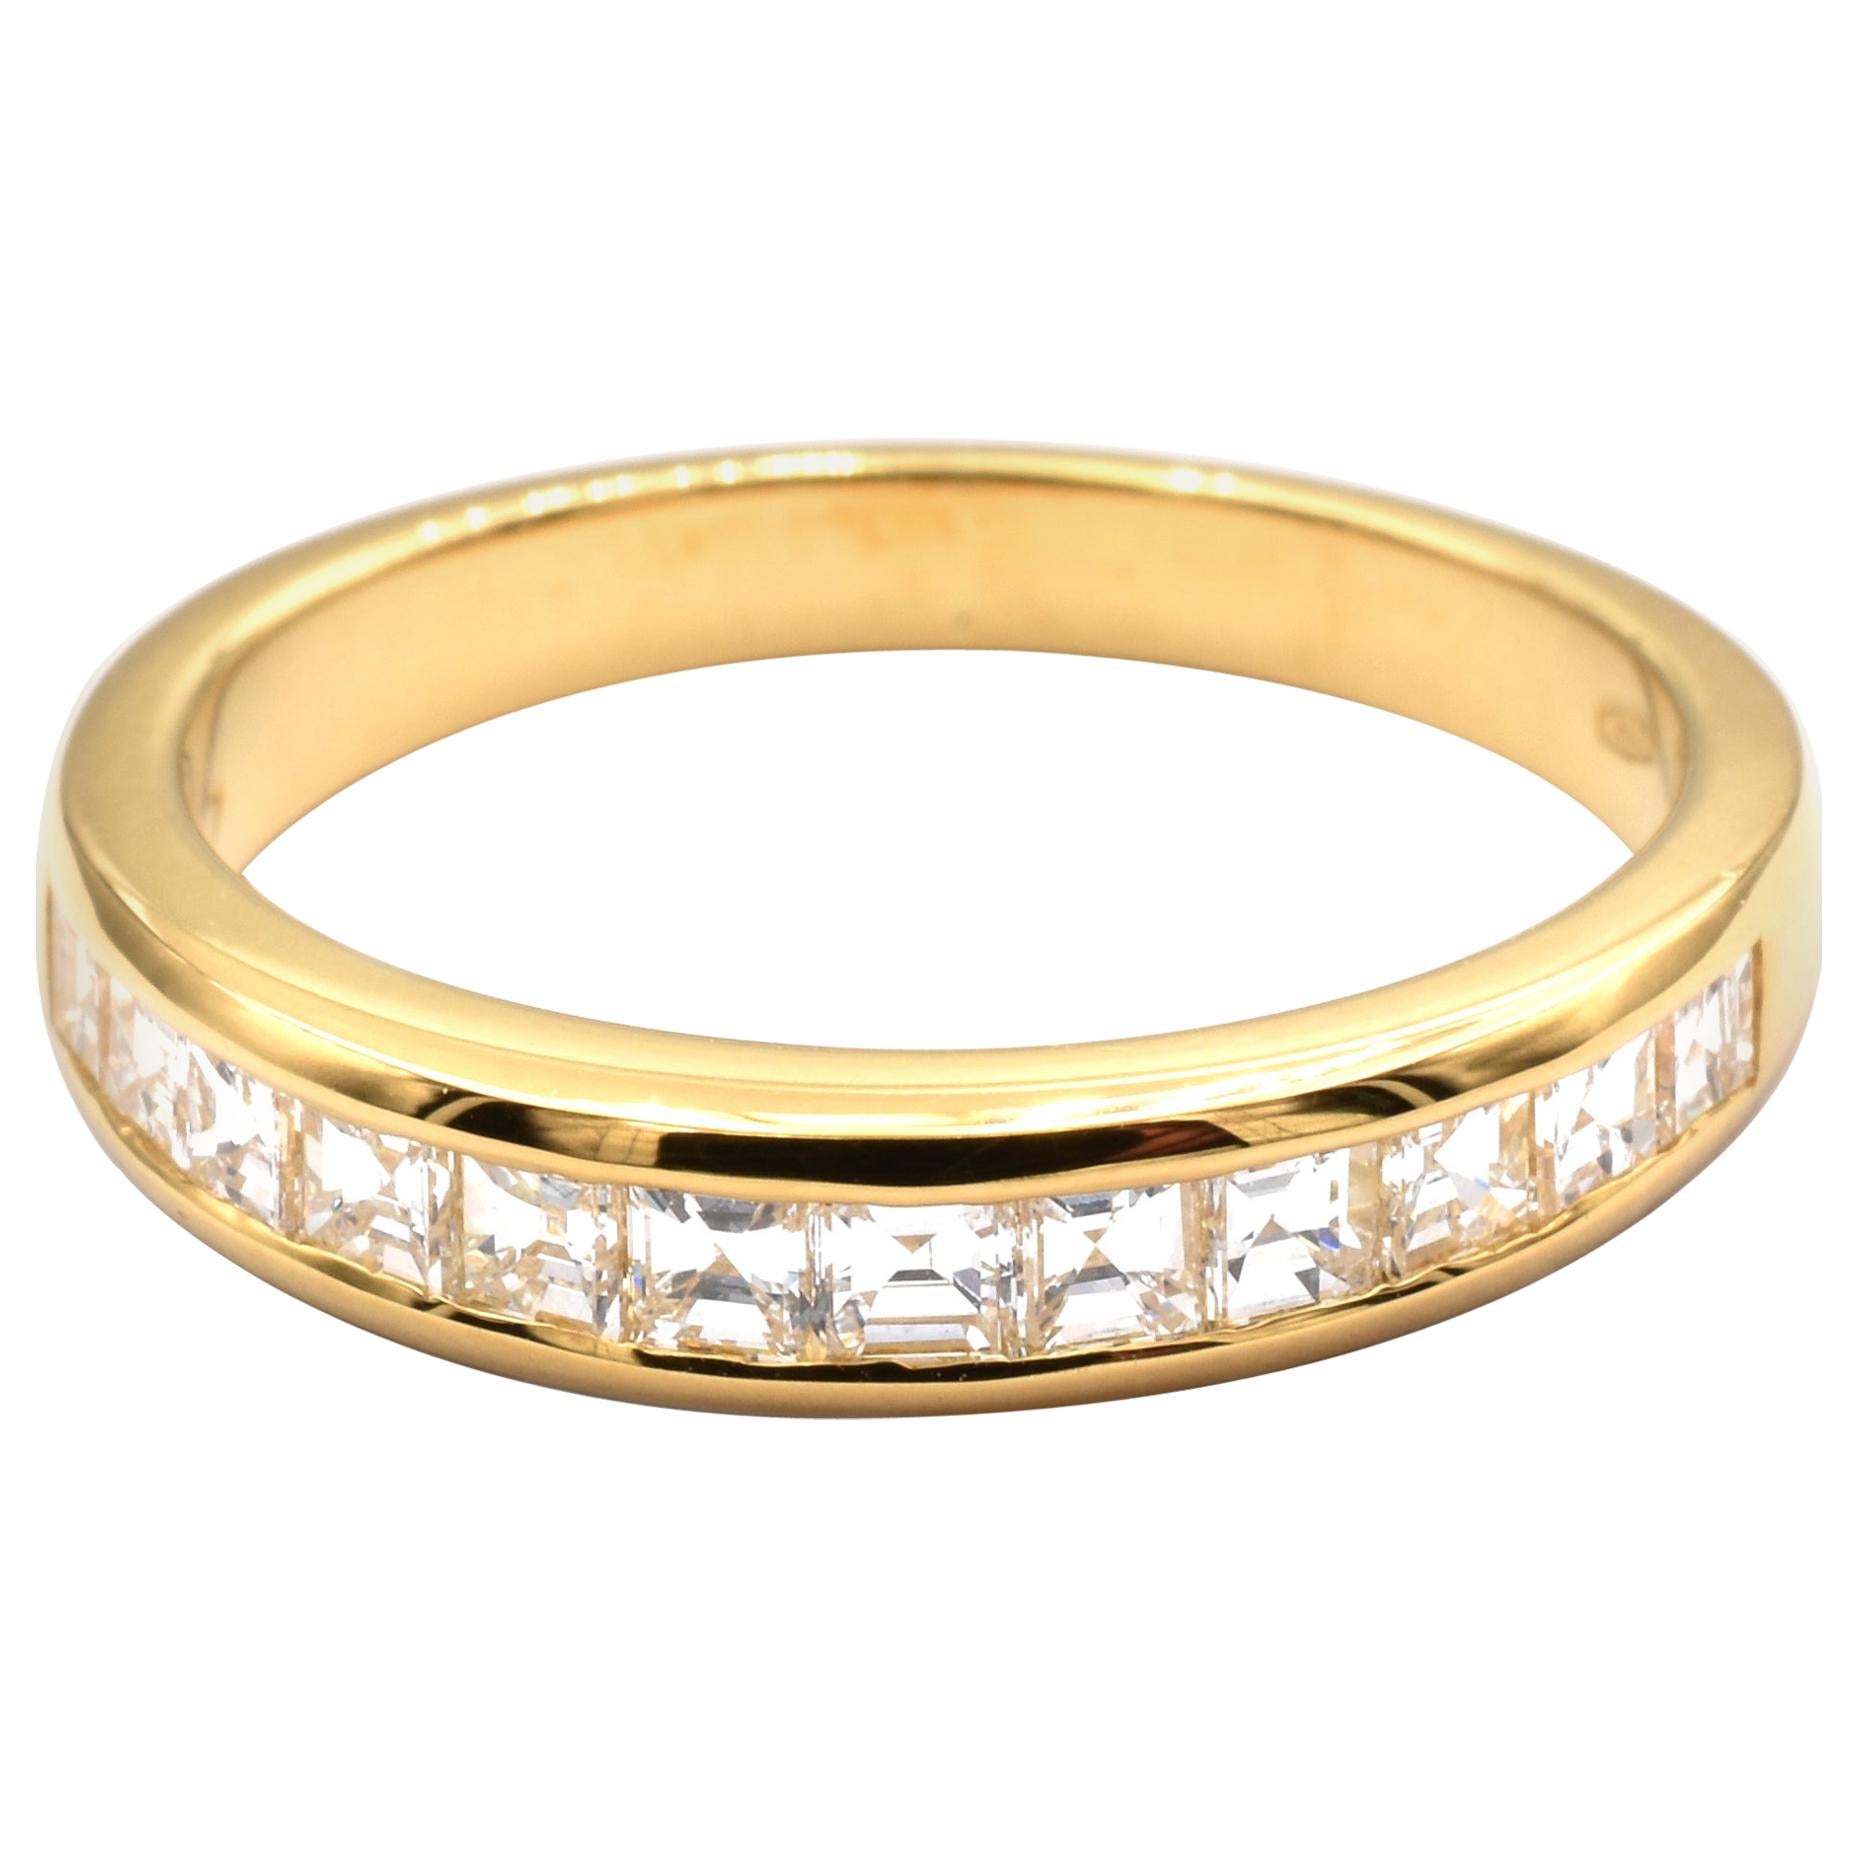 Gilberto Cassola Square Cut Diamonds Yellow Gold Ring Made in Italy For Sale